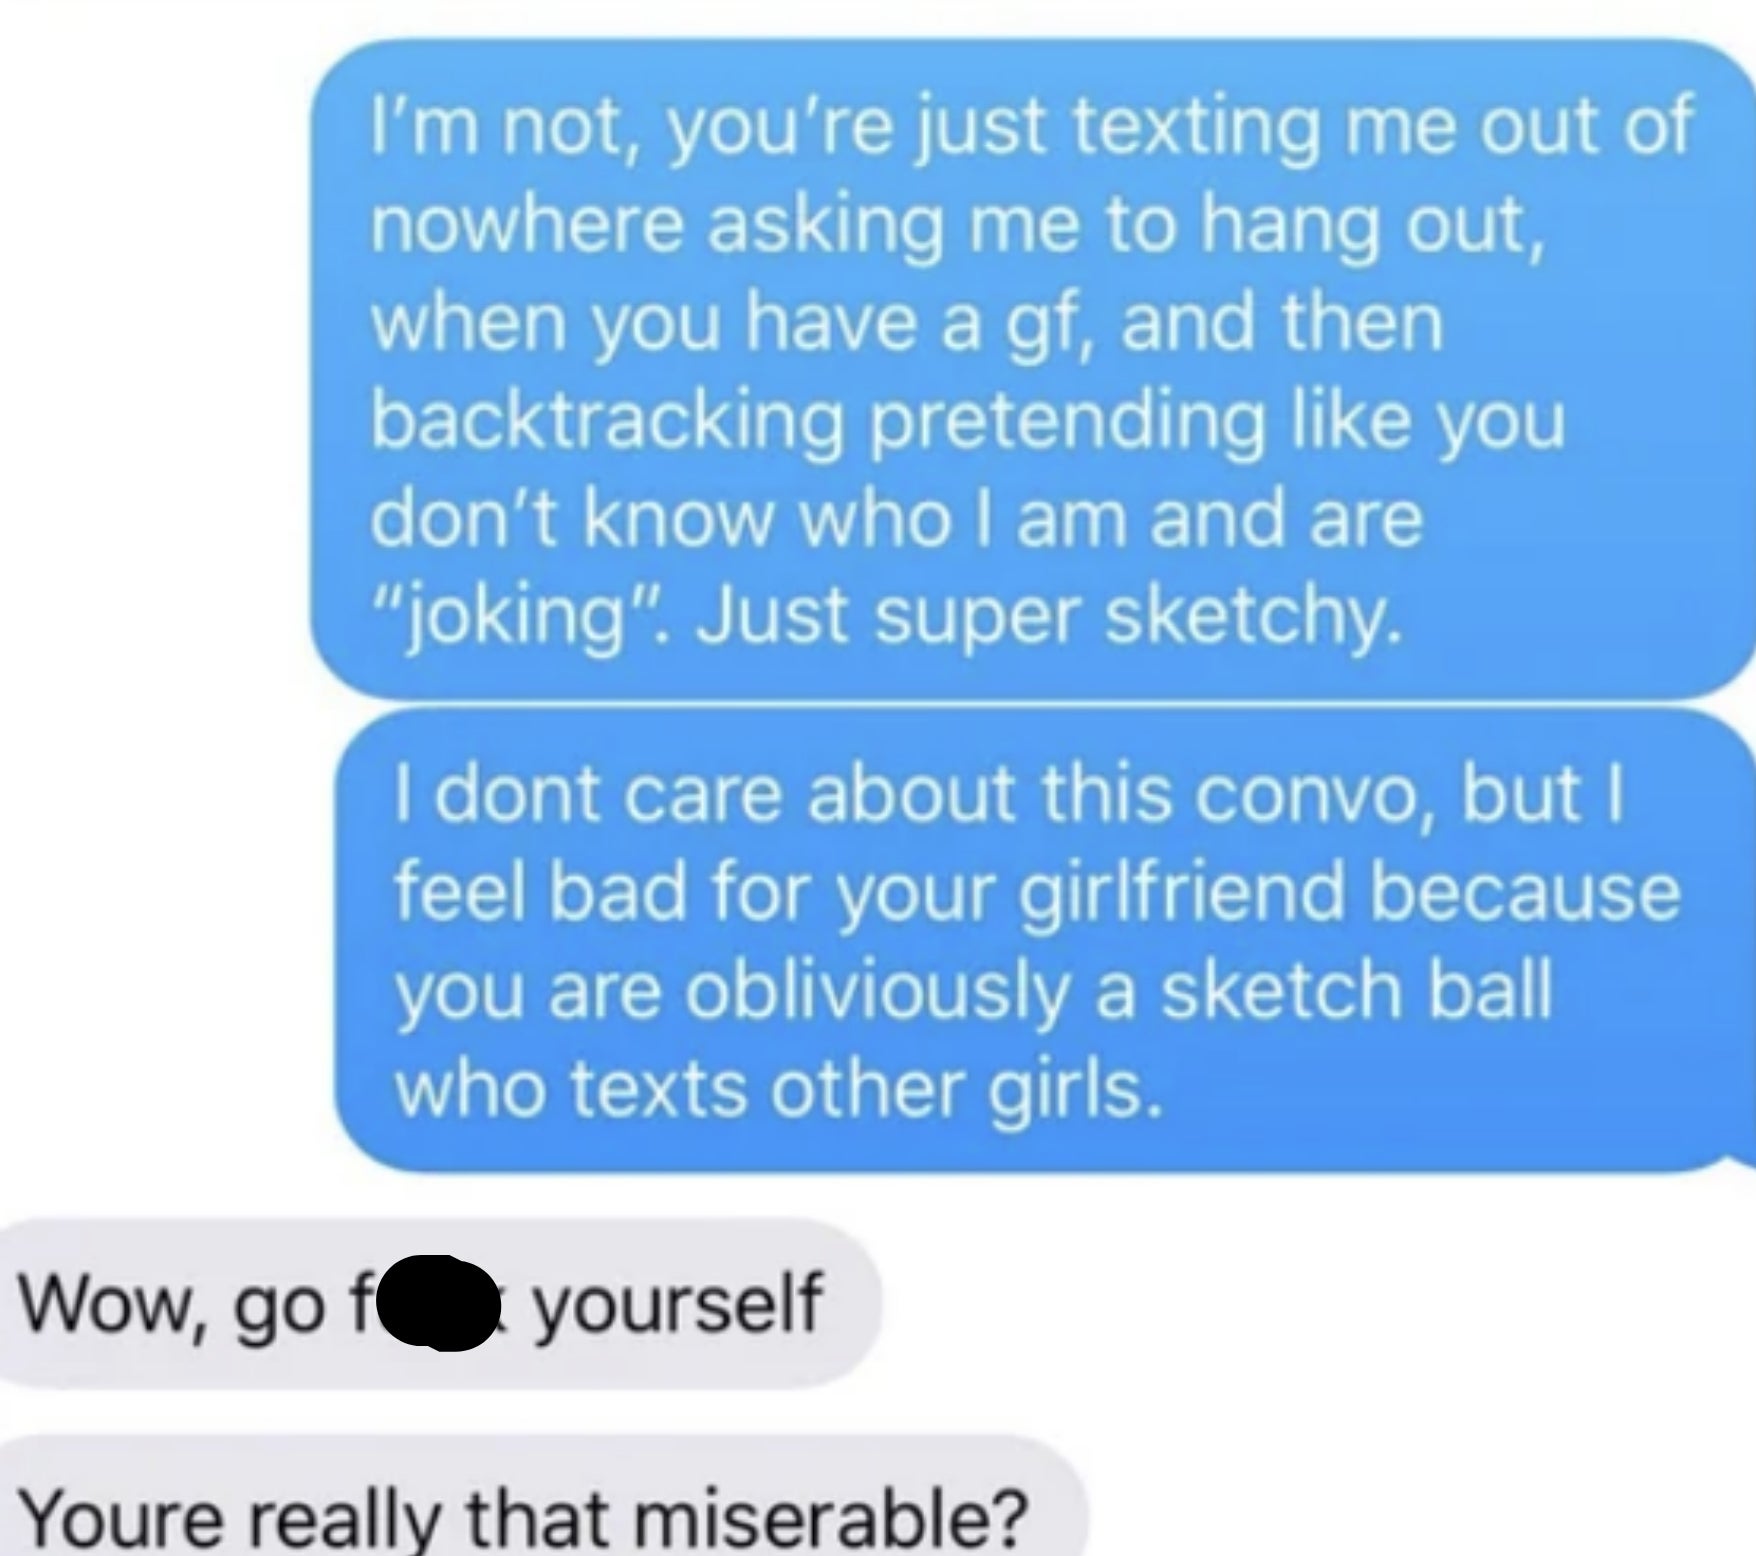 She says &quot;I feel bad for your girlfriend because you are obviously a sketch ball who texts other girls,&quot; &quot;Wow, go fuck. yourself; you&#x27;re really that miserable?&quot; &quot;Nope, my life is pretty good right now,&quot; &quot;Keep telling yourself that&quot;